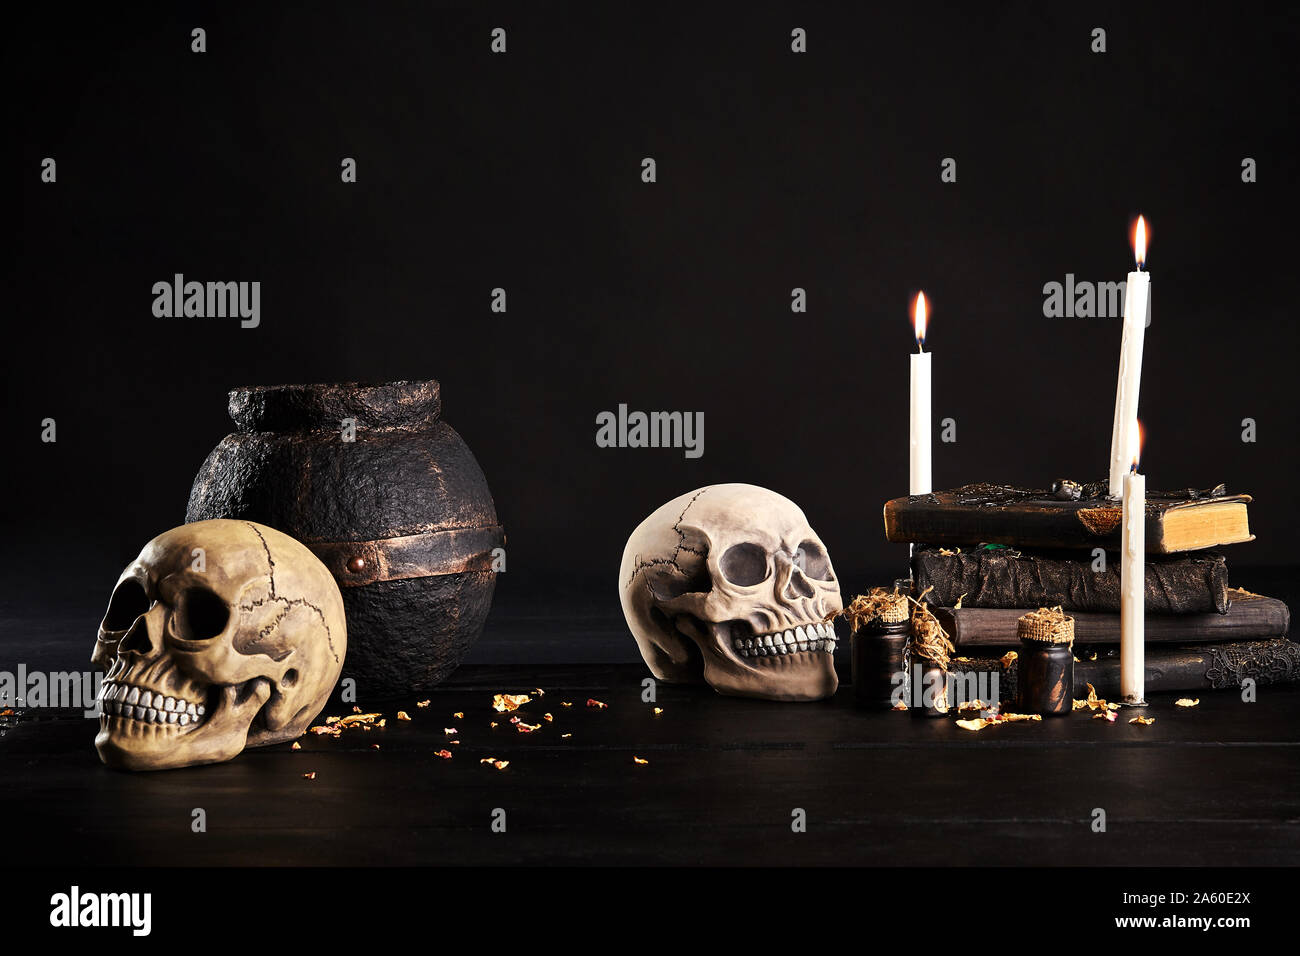 Realistic model of two craniums with white teeth, books with spells, jars of potion, old pot, burning candles are on a wooden dark table. The petals o Stock Photo